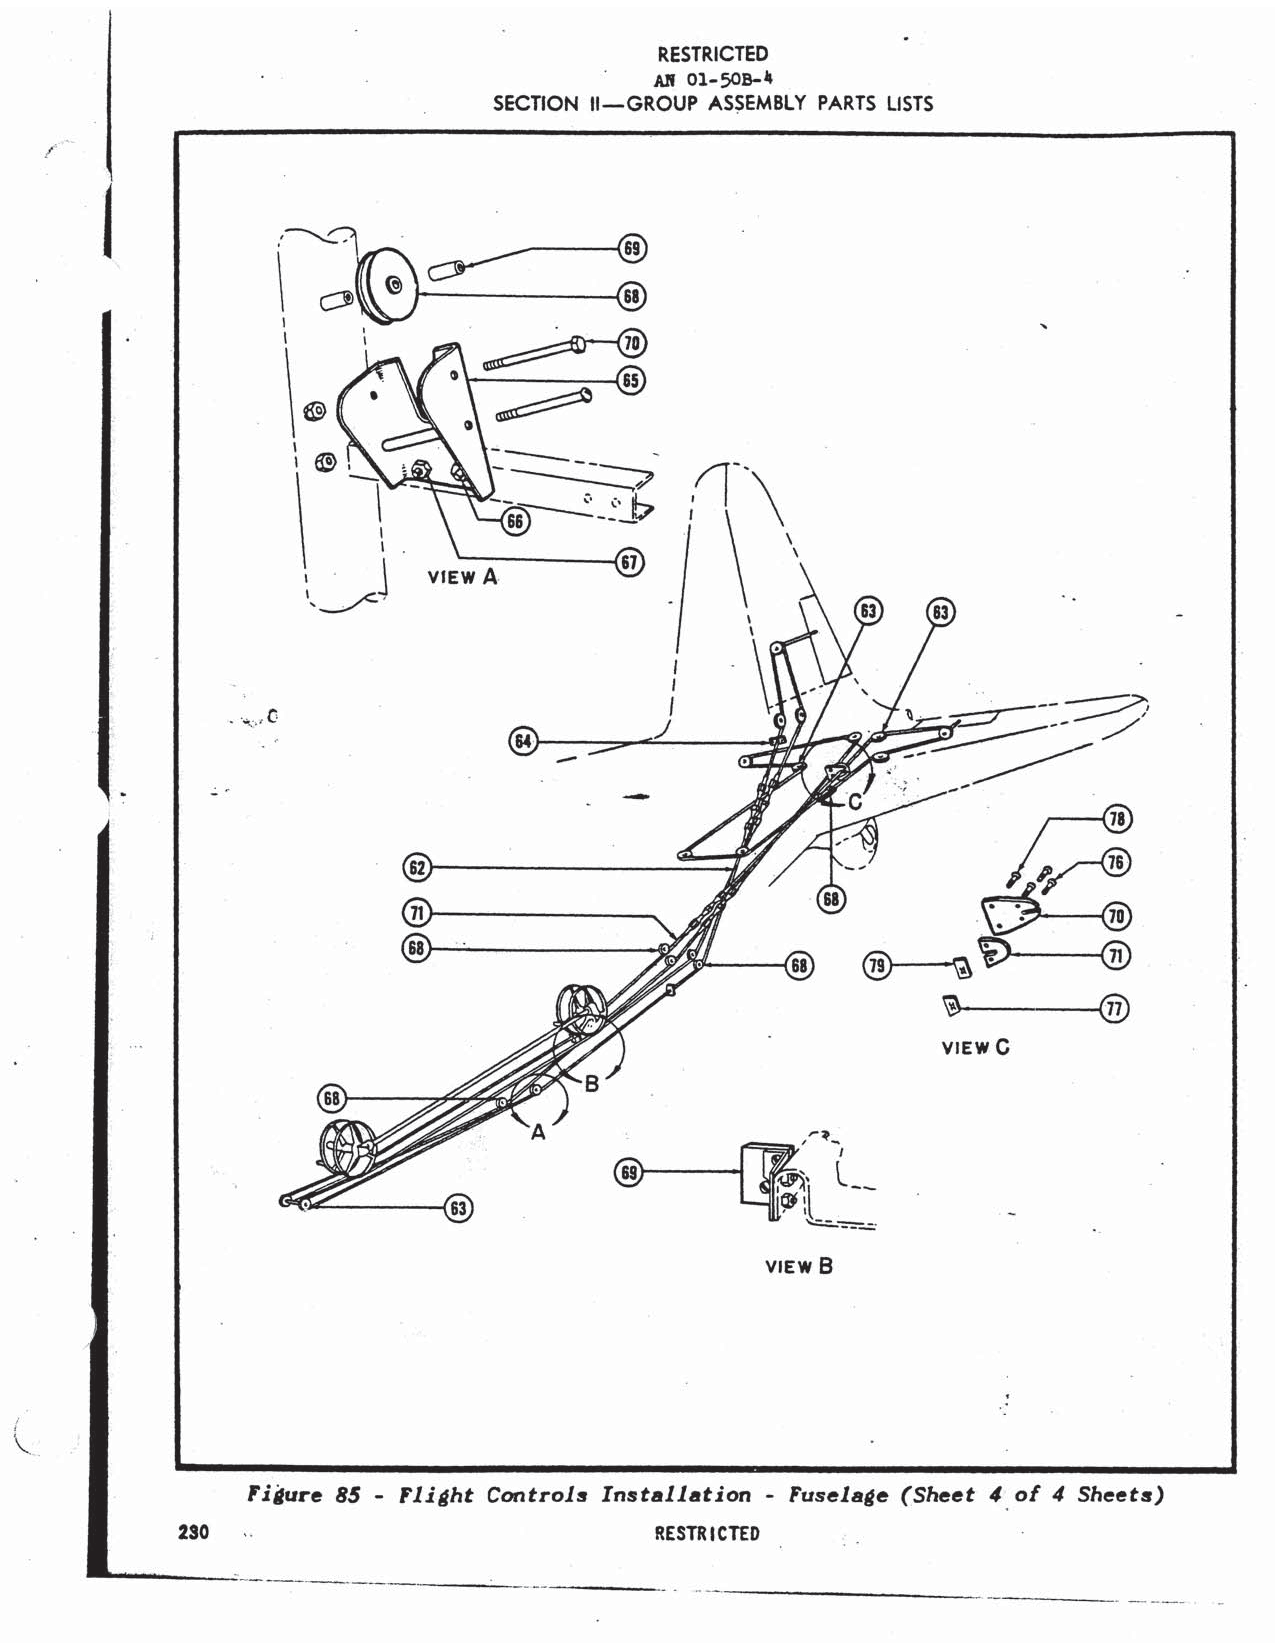 Sample page 232 from AirCorps Library document: Parts Catalog - BT-13, BT-15, SNV-1